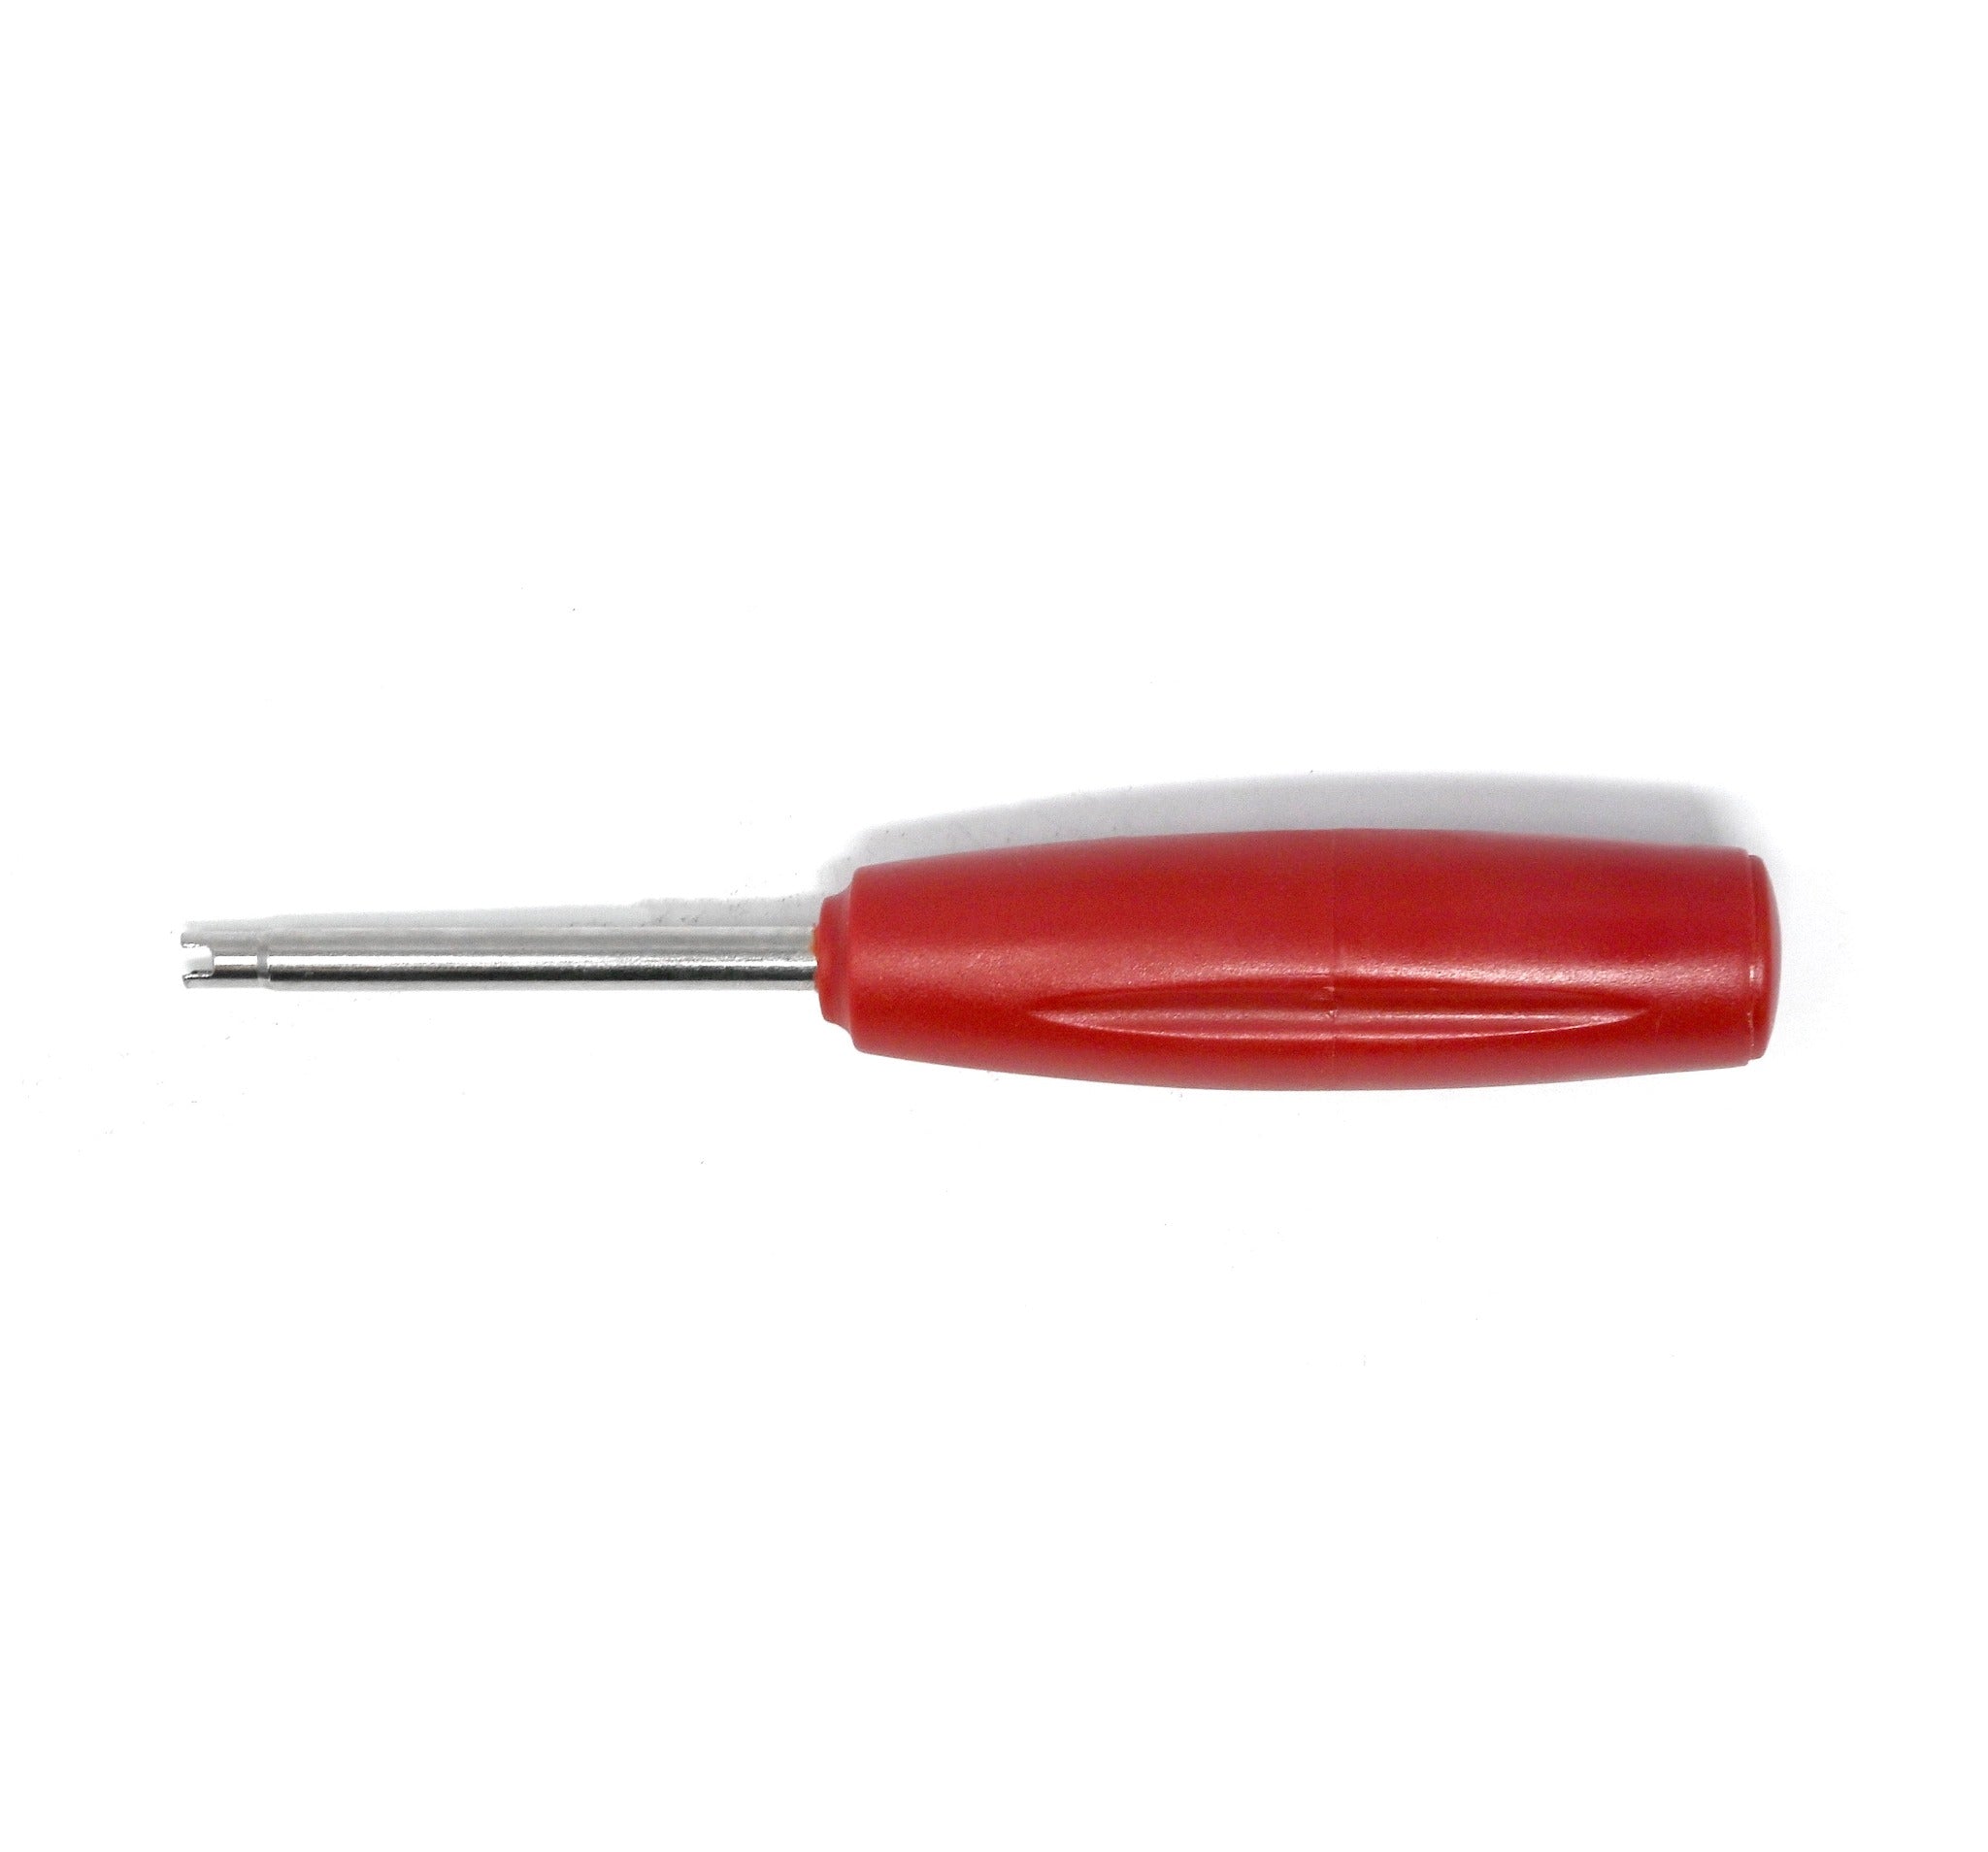 TPMS Valve Core Torque Tool, Red